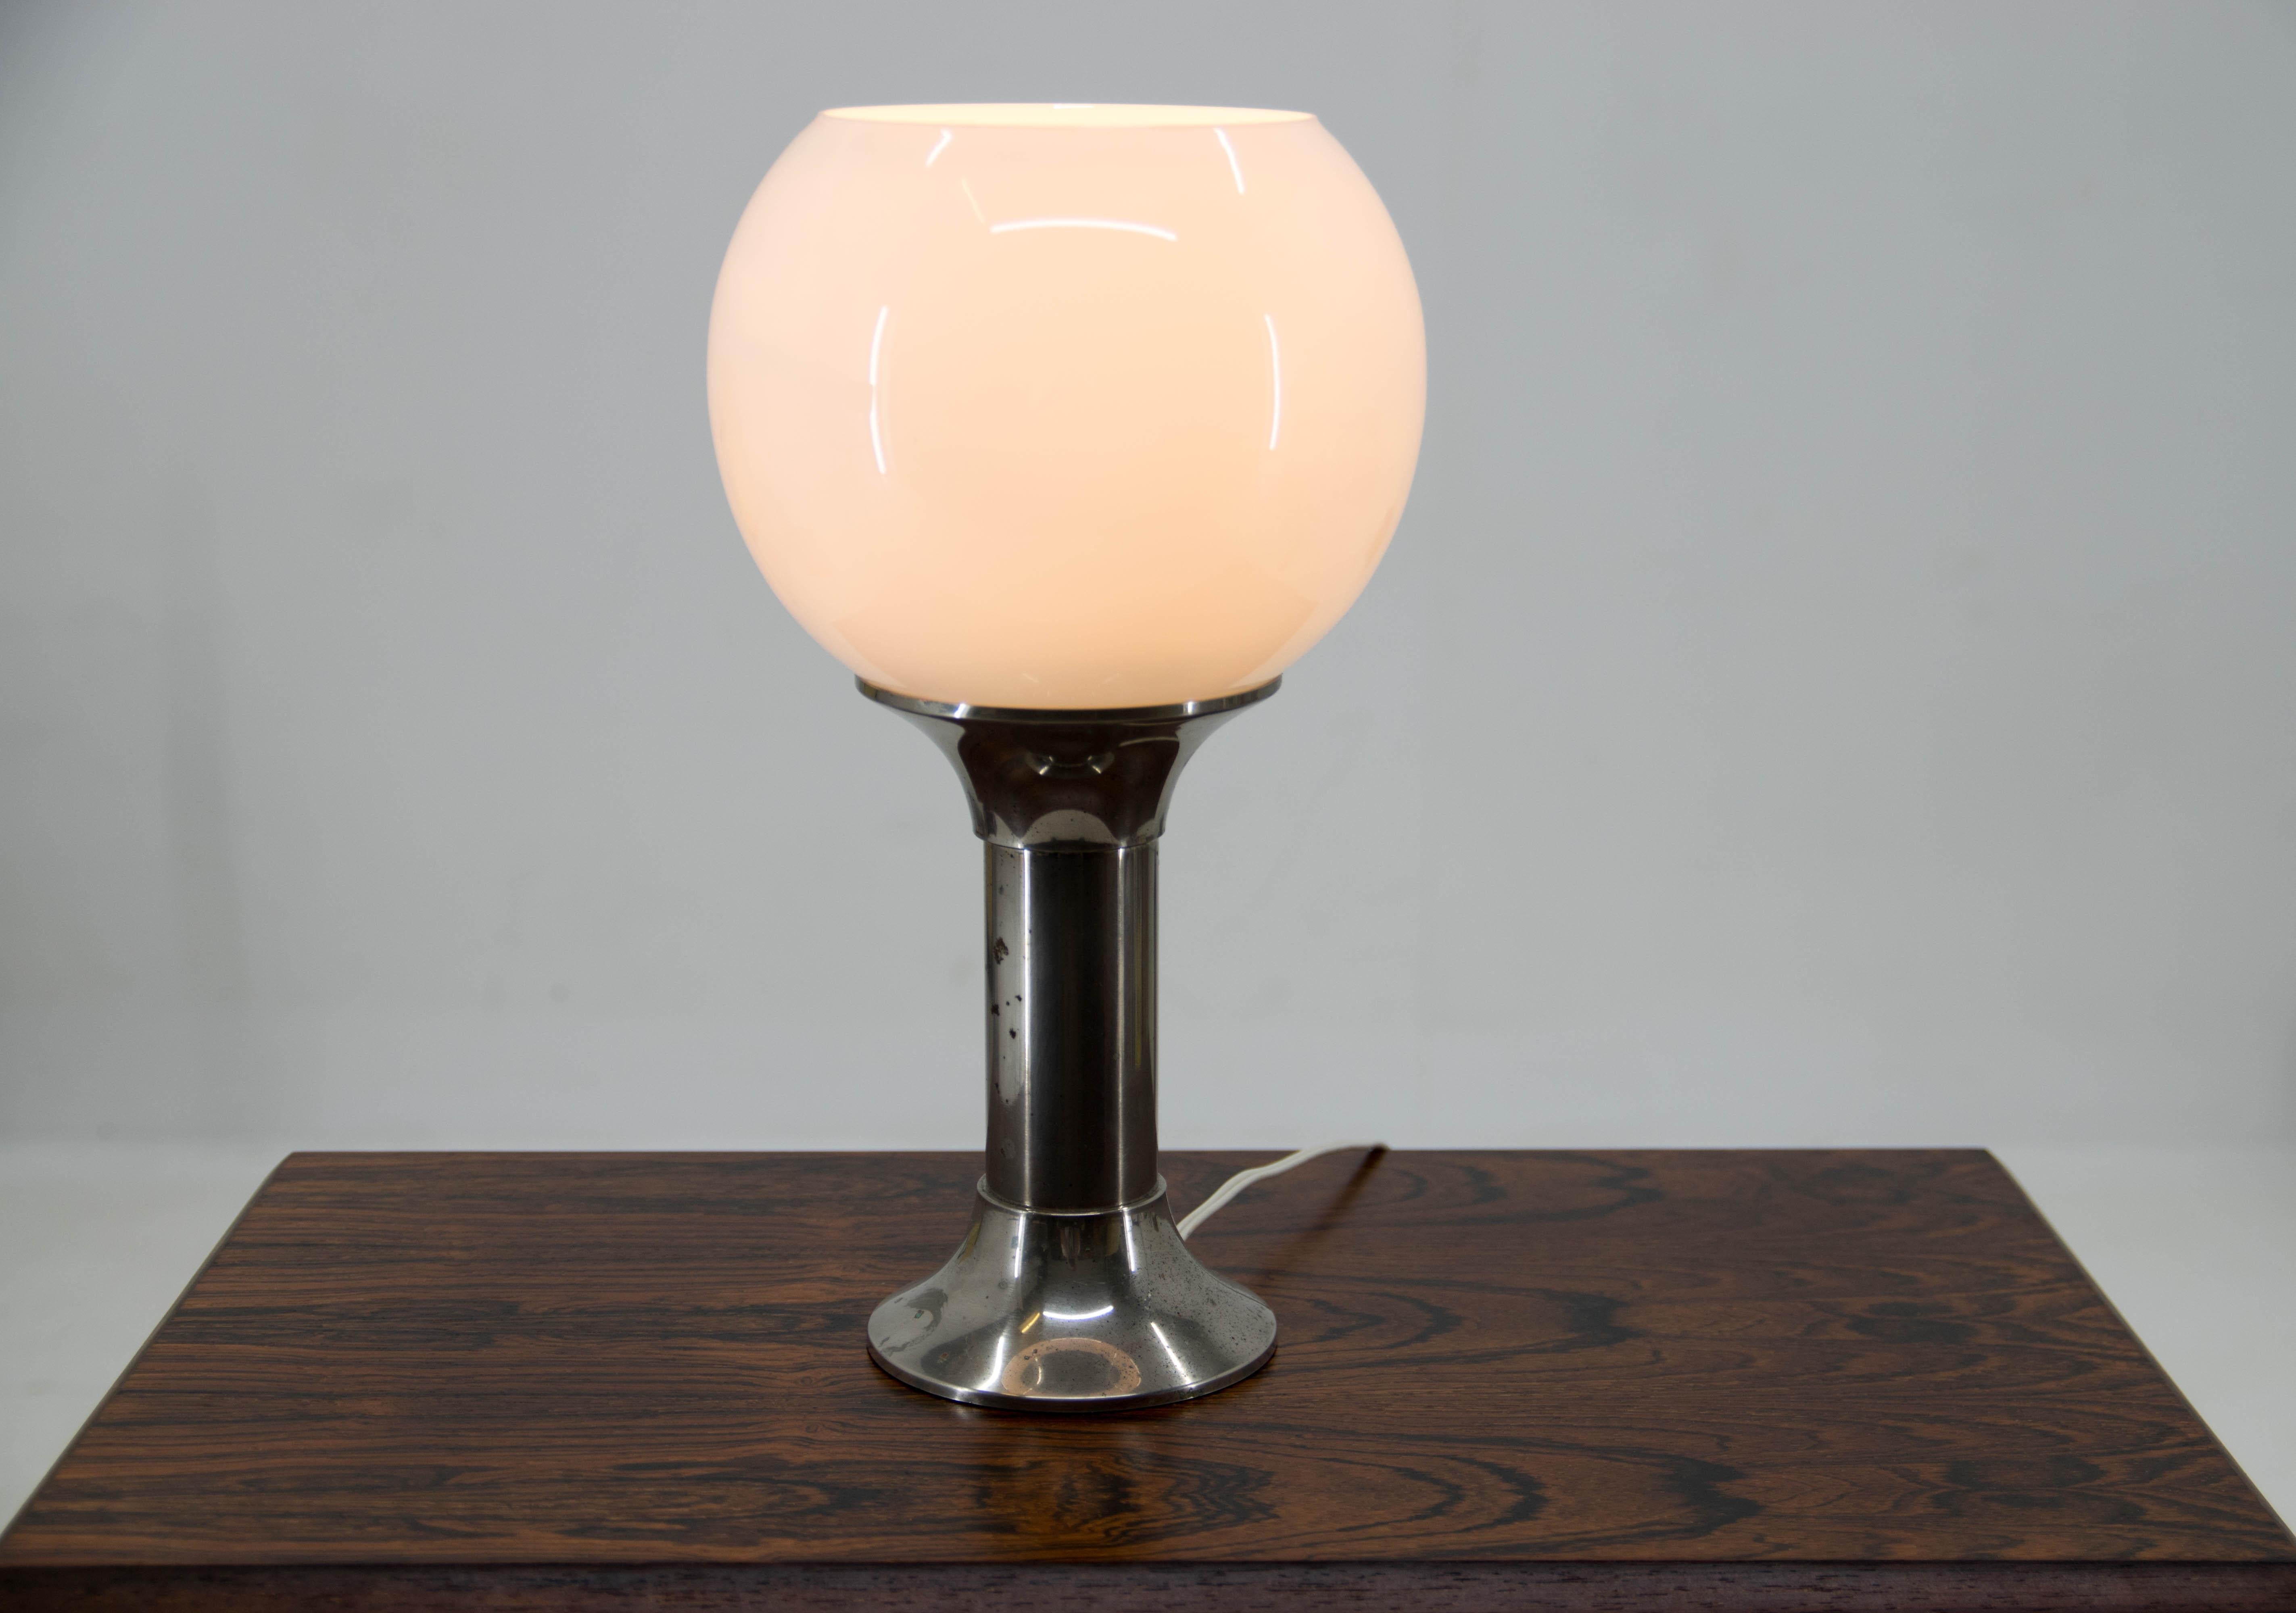 Nickel-plated base with minor age patina
Opaline glass in perfect condition
Rewired: 1x40W, E25-E27 bulb
US plug adapter included.